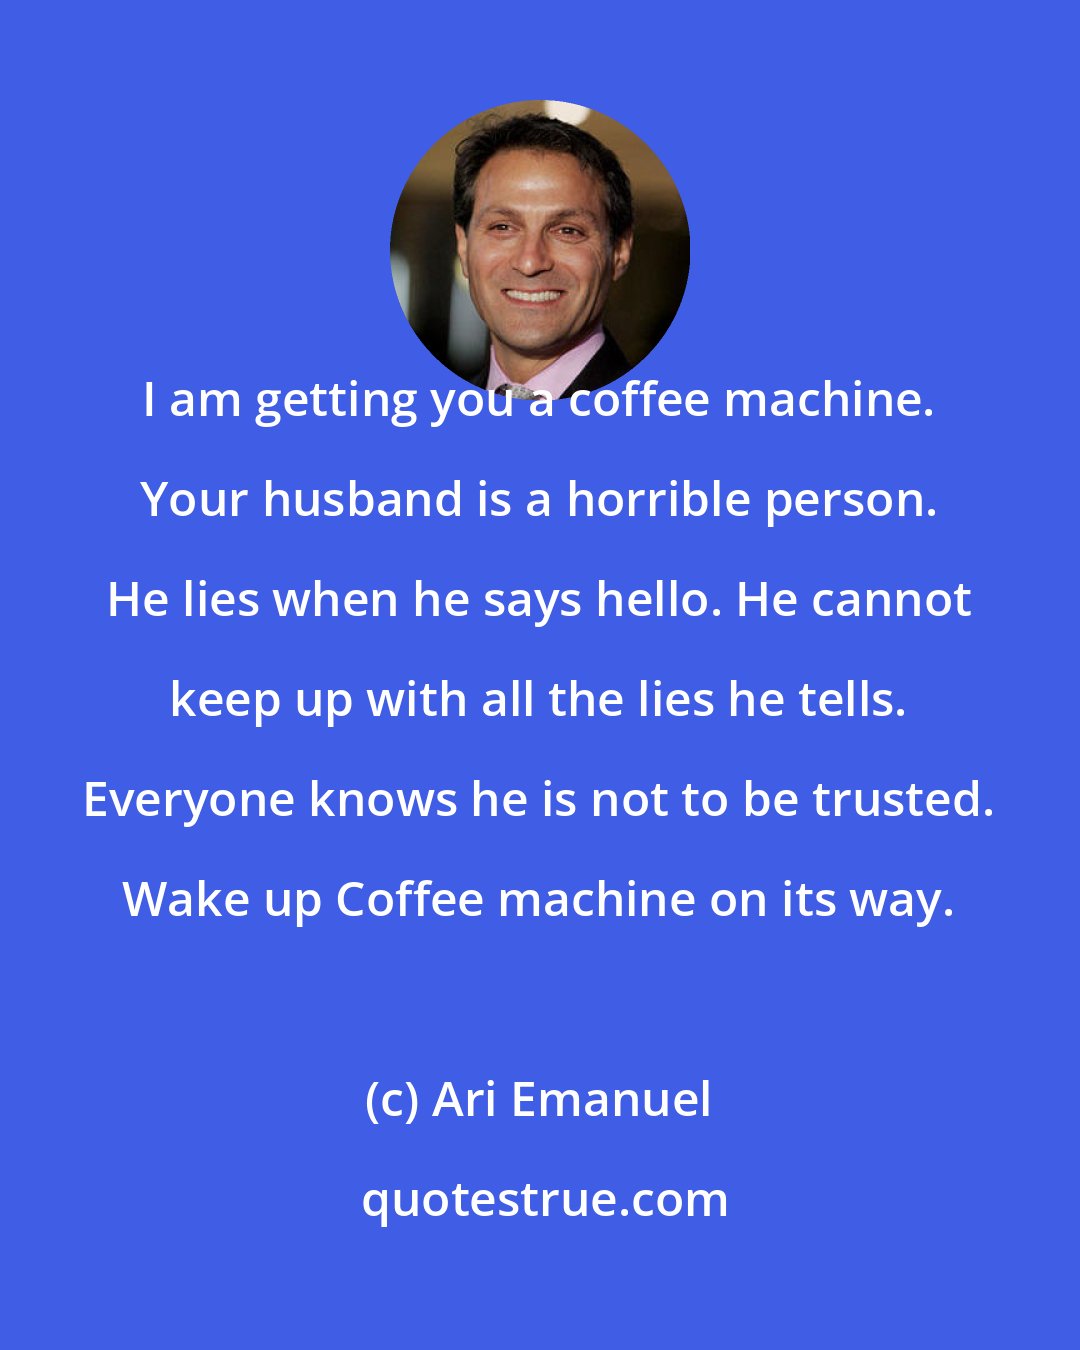 Ari Emanuel: I am getting you a coffee machine. Your husband is a horrible person. He lies when he says hello. He cannot keep up with all the lies he tells. Everyone knows he is not to be trusted. Wake up Coffee machine on its way.